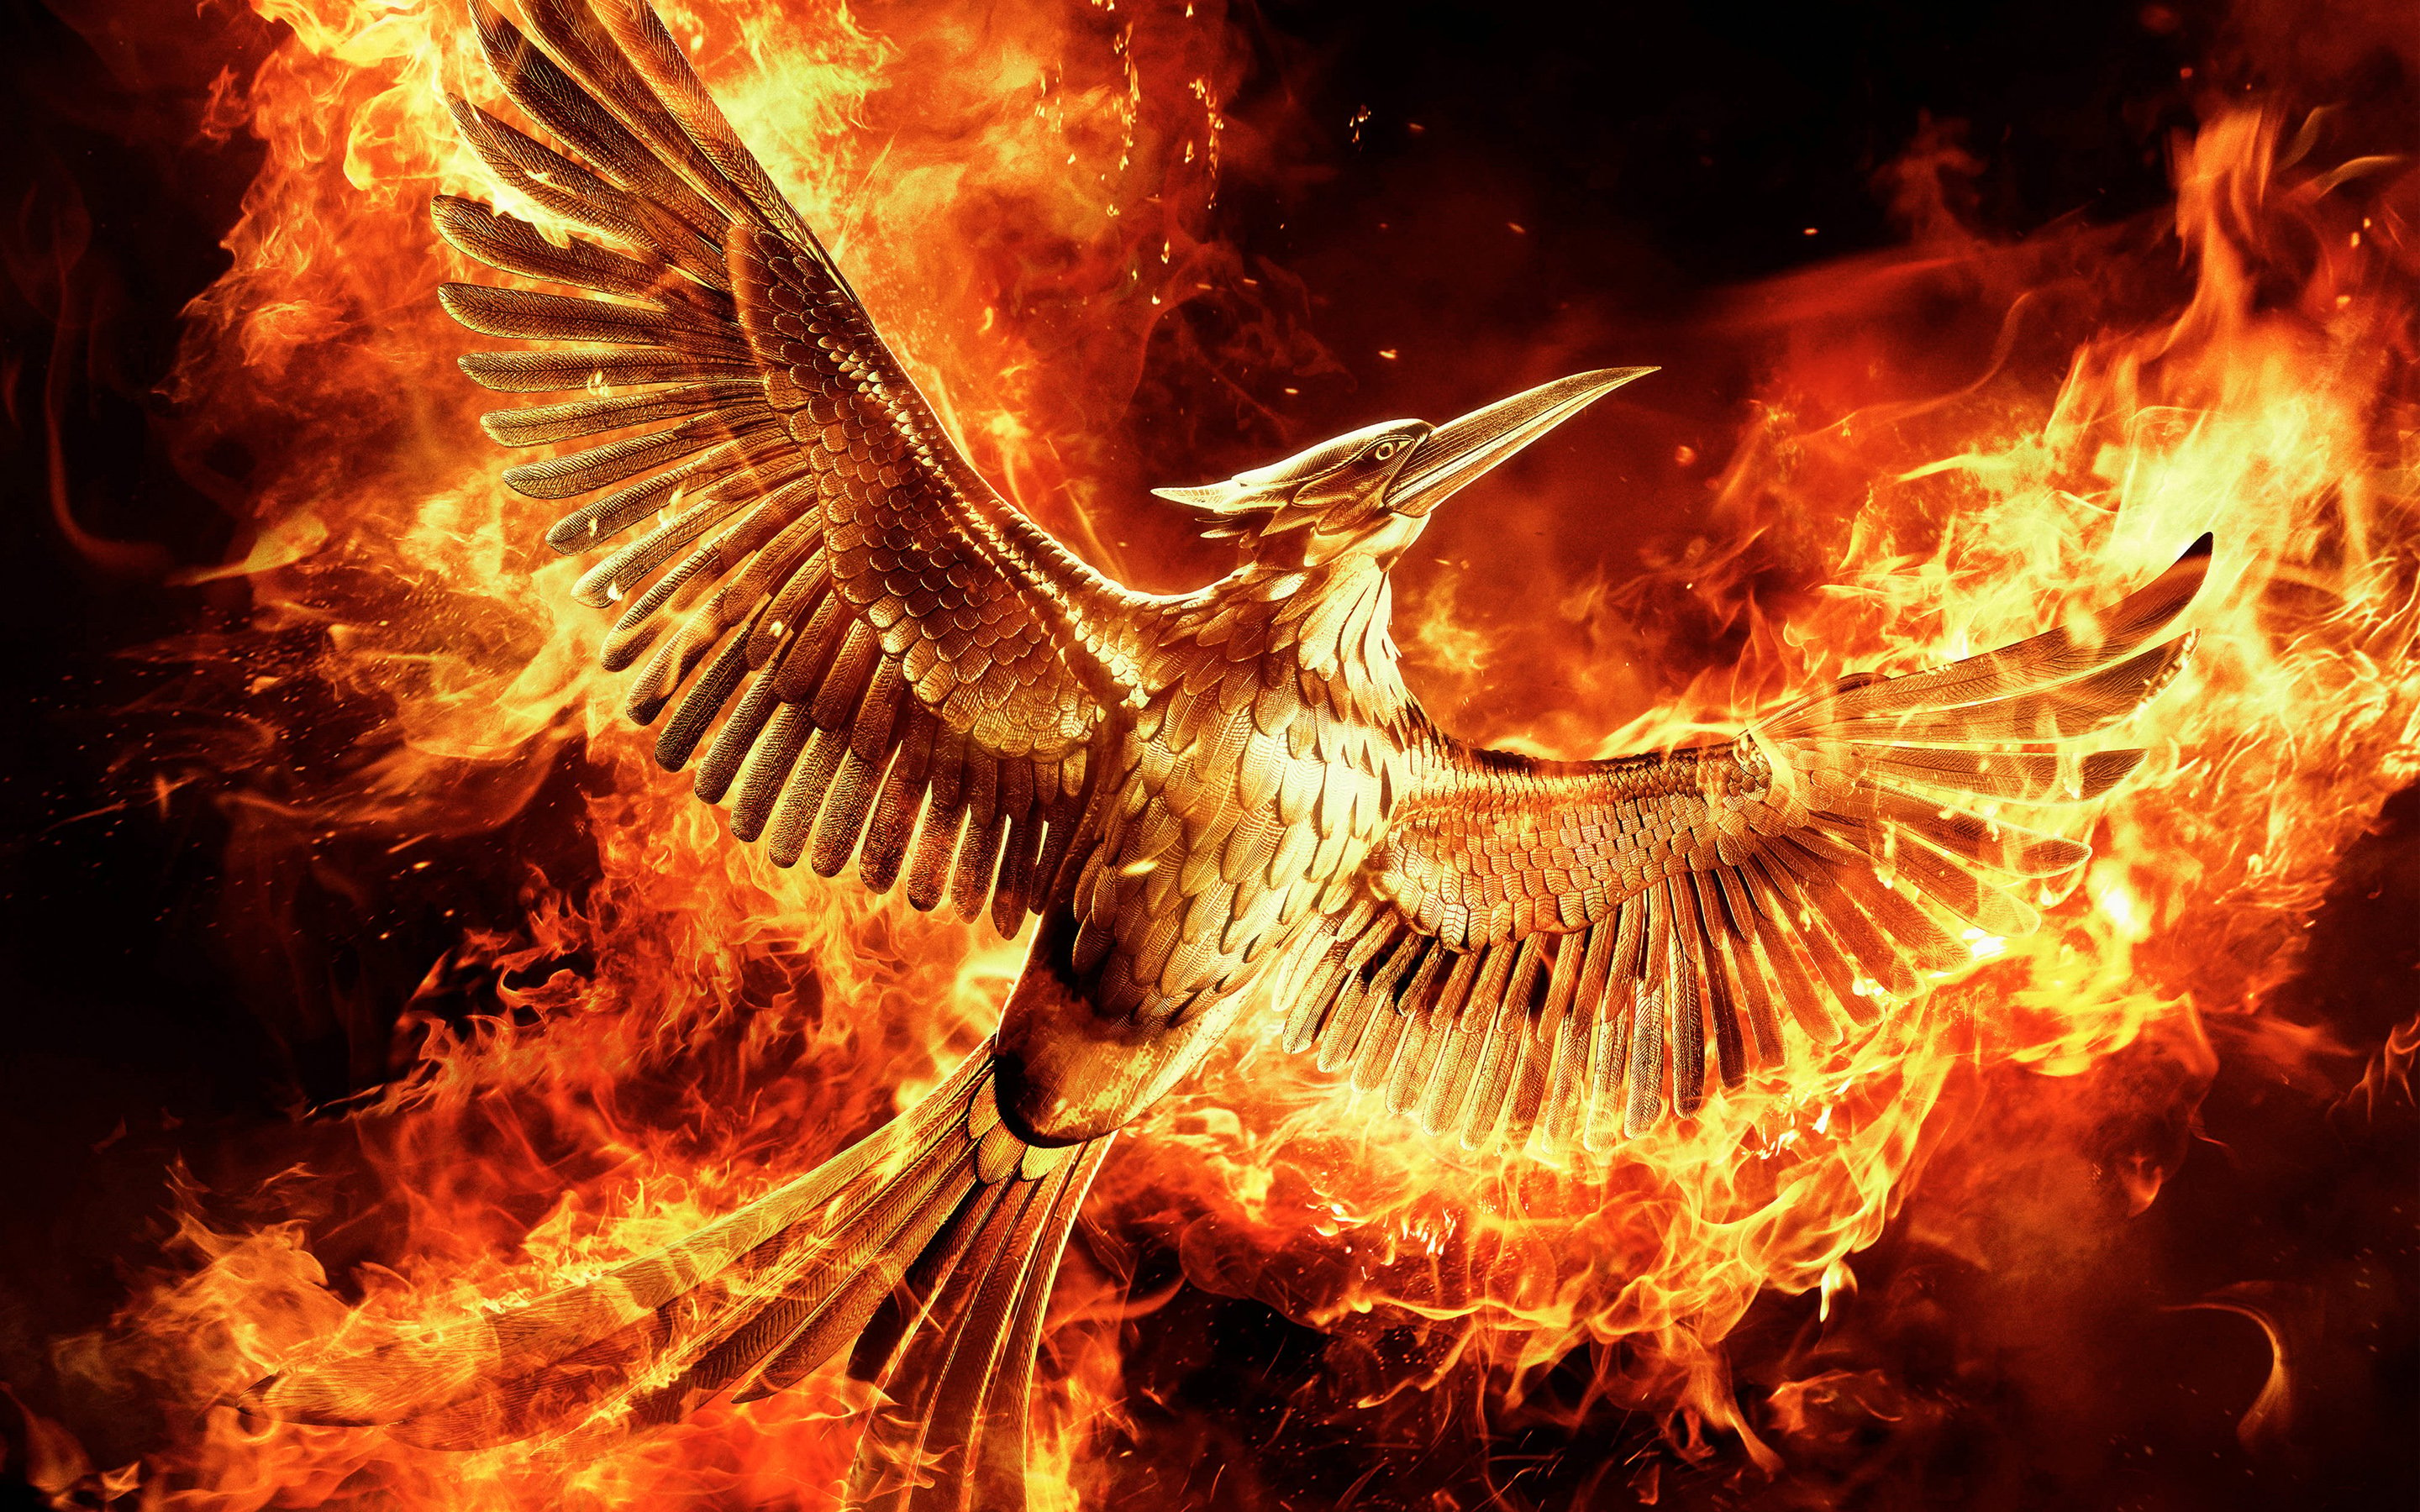 Hunger Games Mockingjay Part 2 Wallpapers   HD Wallpapers 103769